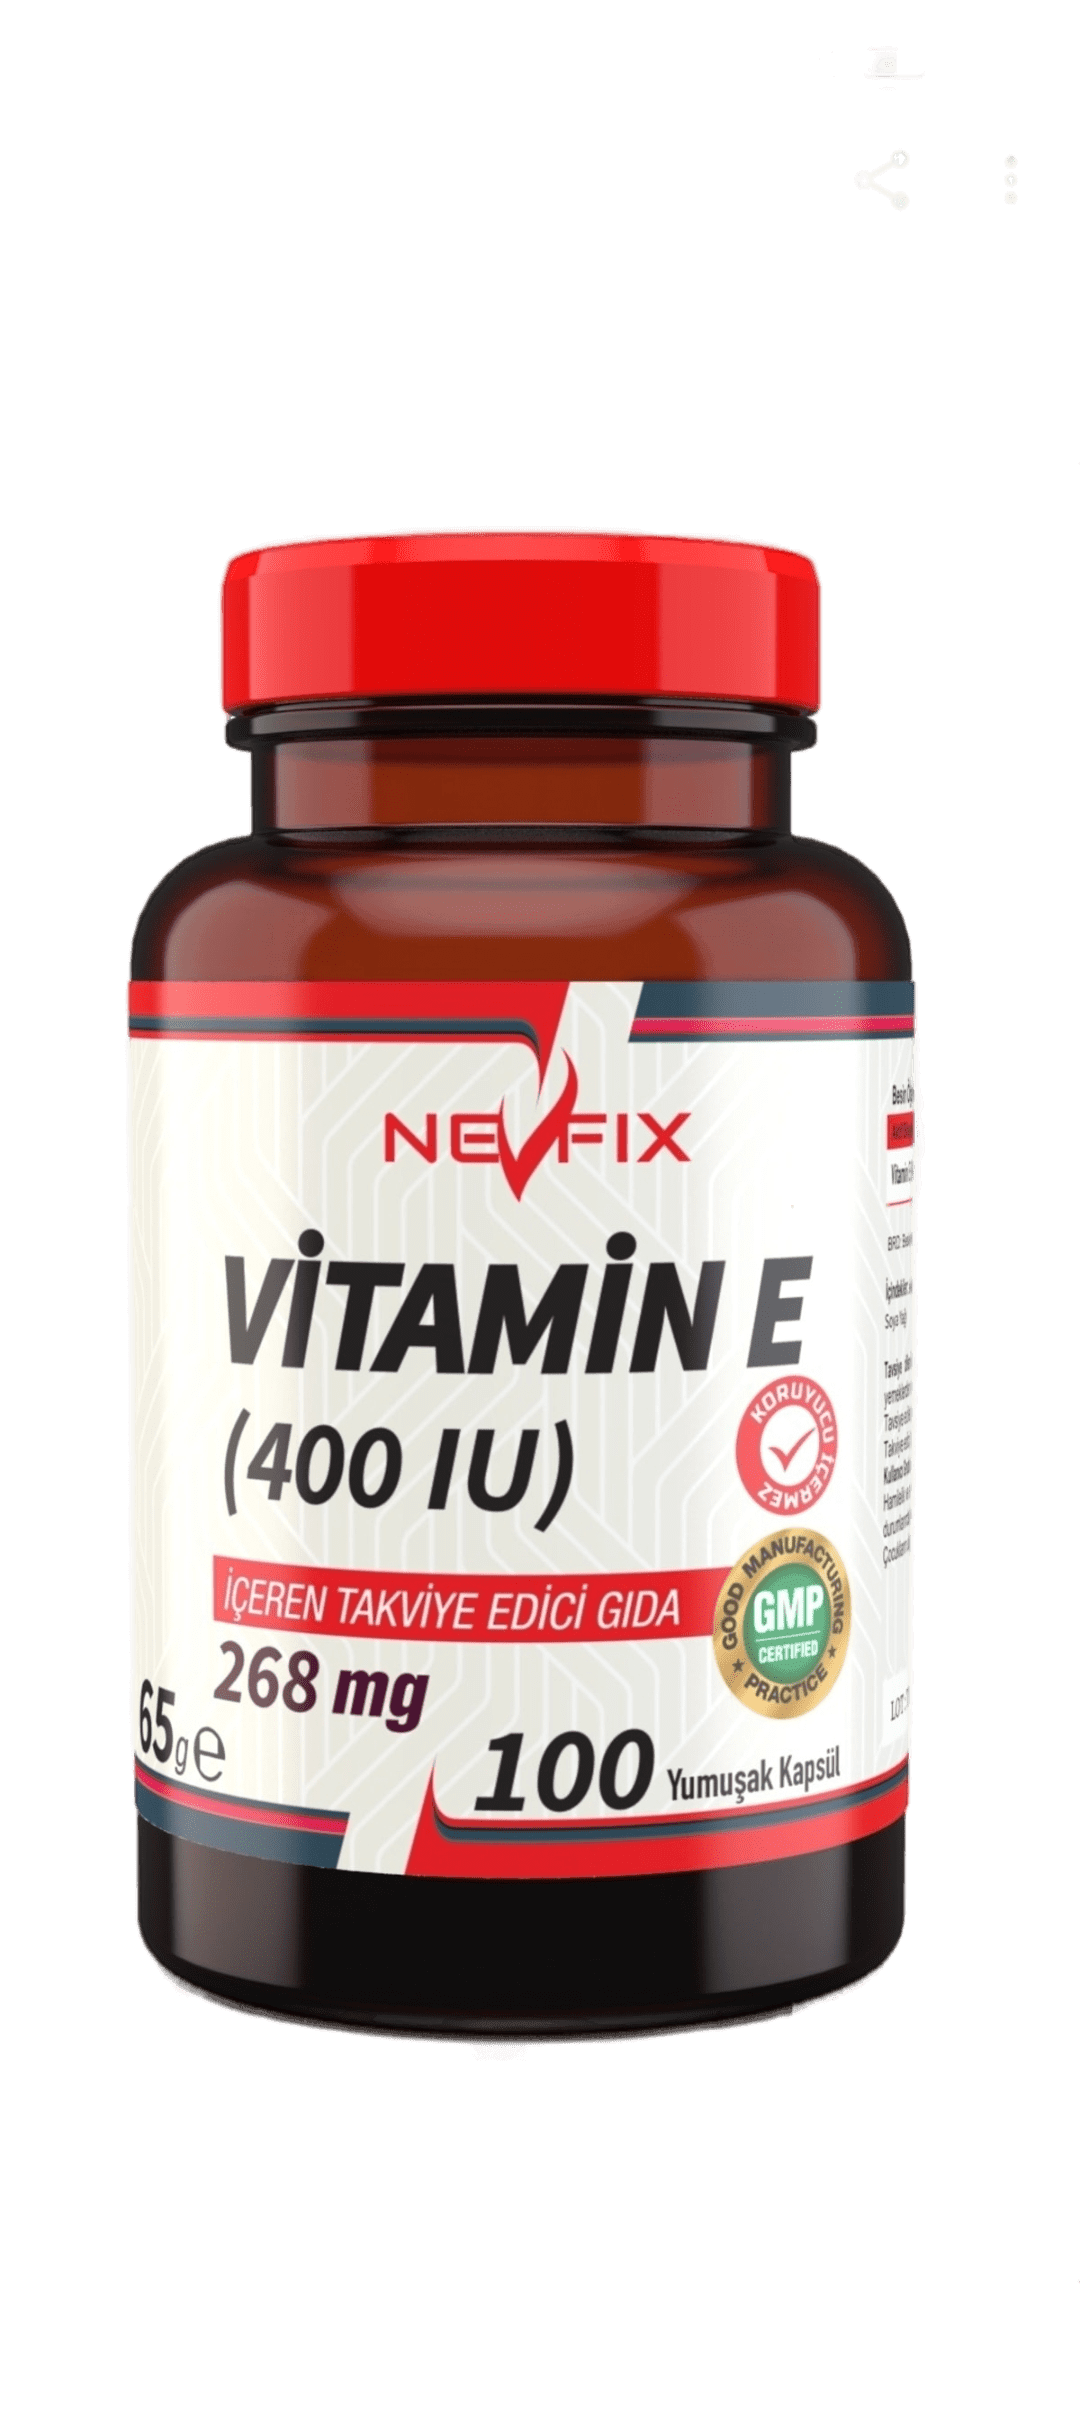 Vitamin E - The Supplements Factory